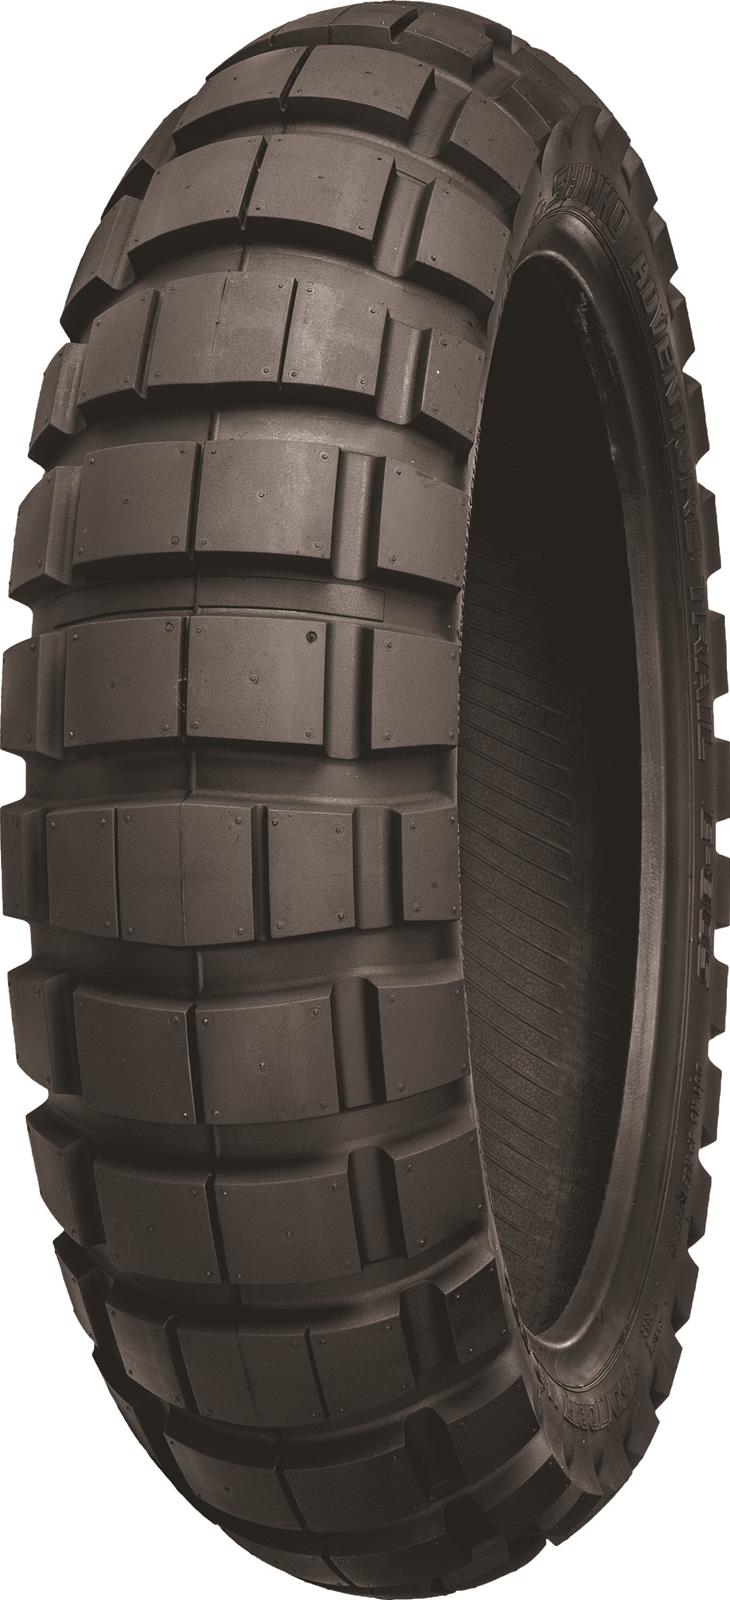 Shinko E-804 Front Dual Sport Motorcycle Tire, Tires and Wheels